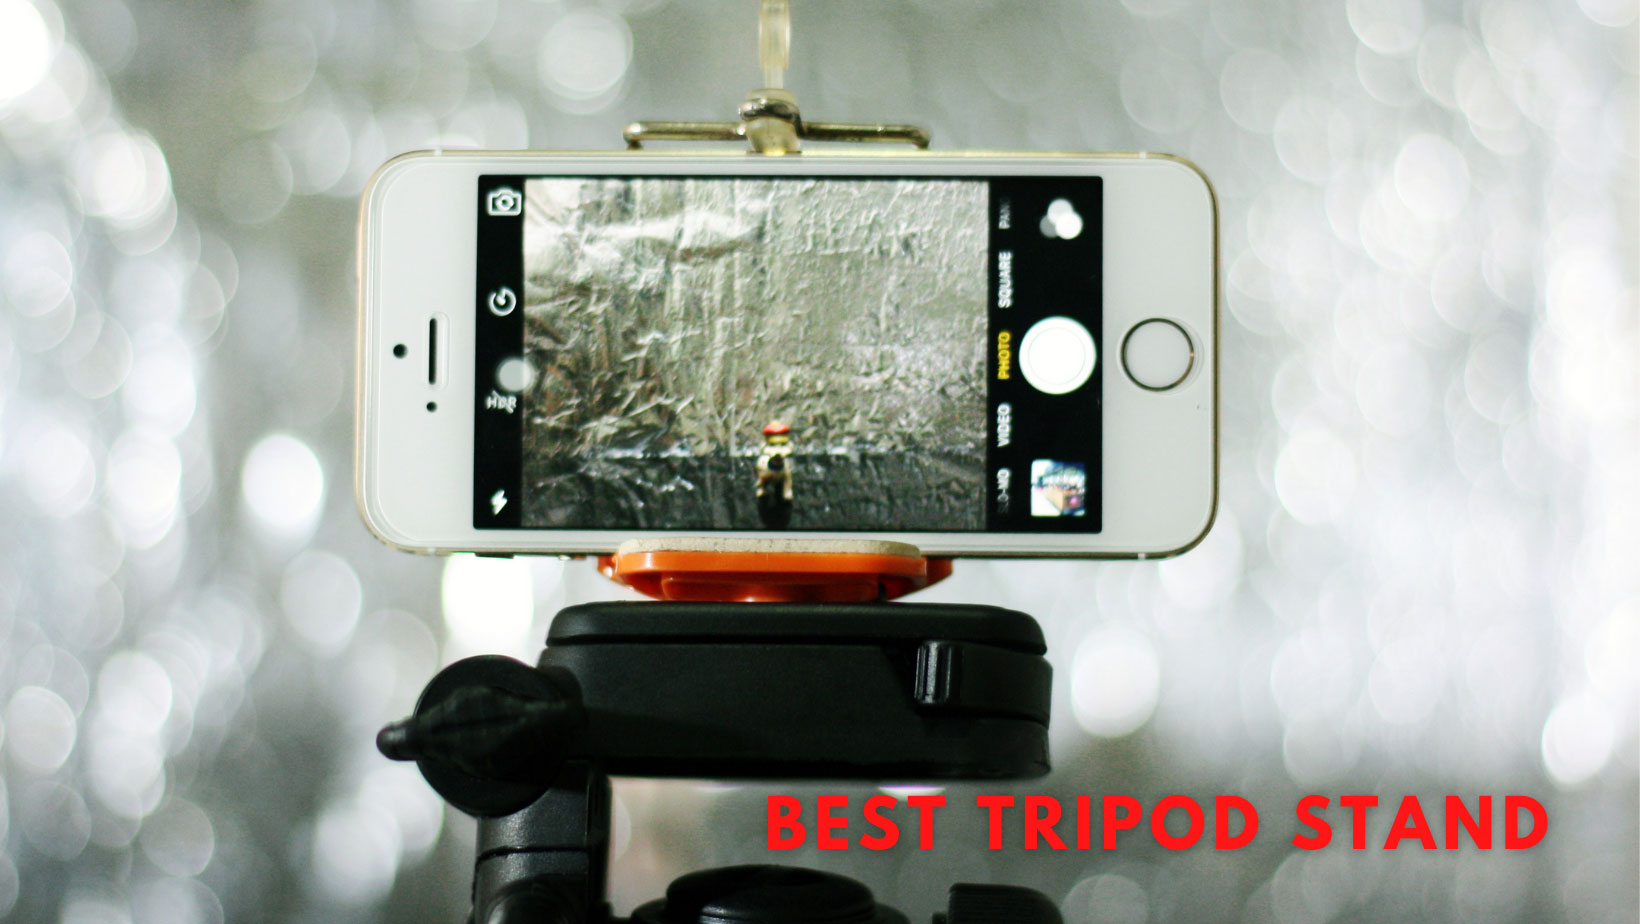 Top 10 Best Tripod Stands for Mobile phones in 2021